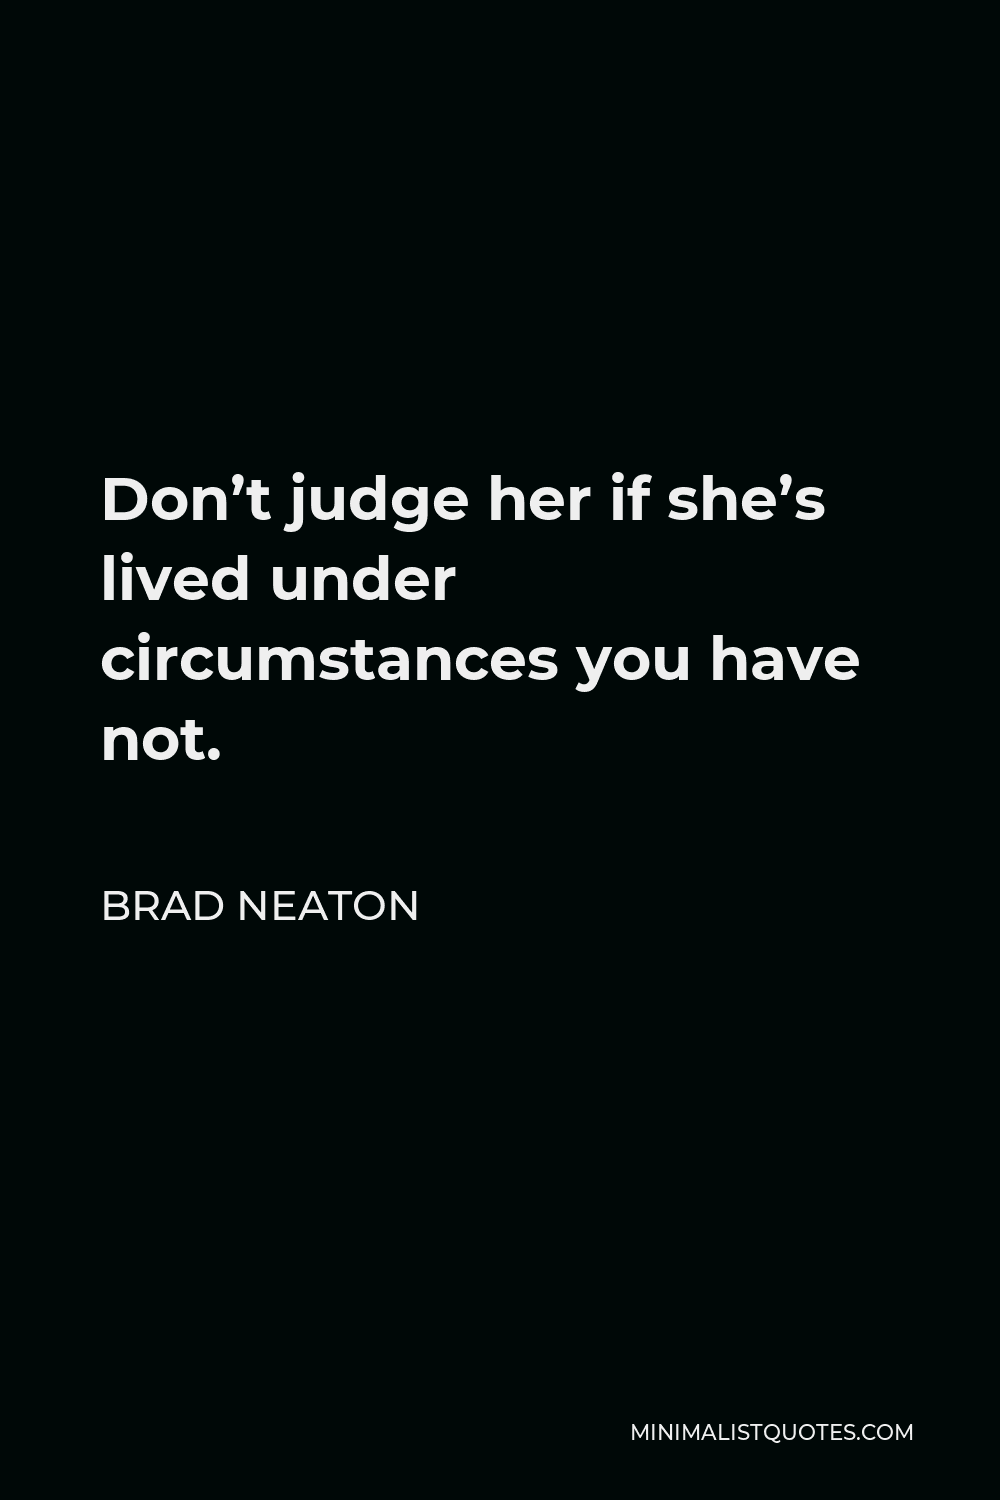 Brad Neaton Quote - Don’t judge her if she’s lived under circumstances you have not.